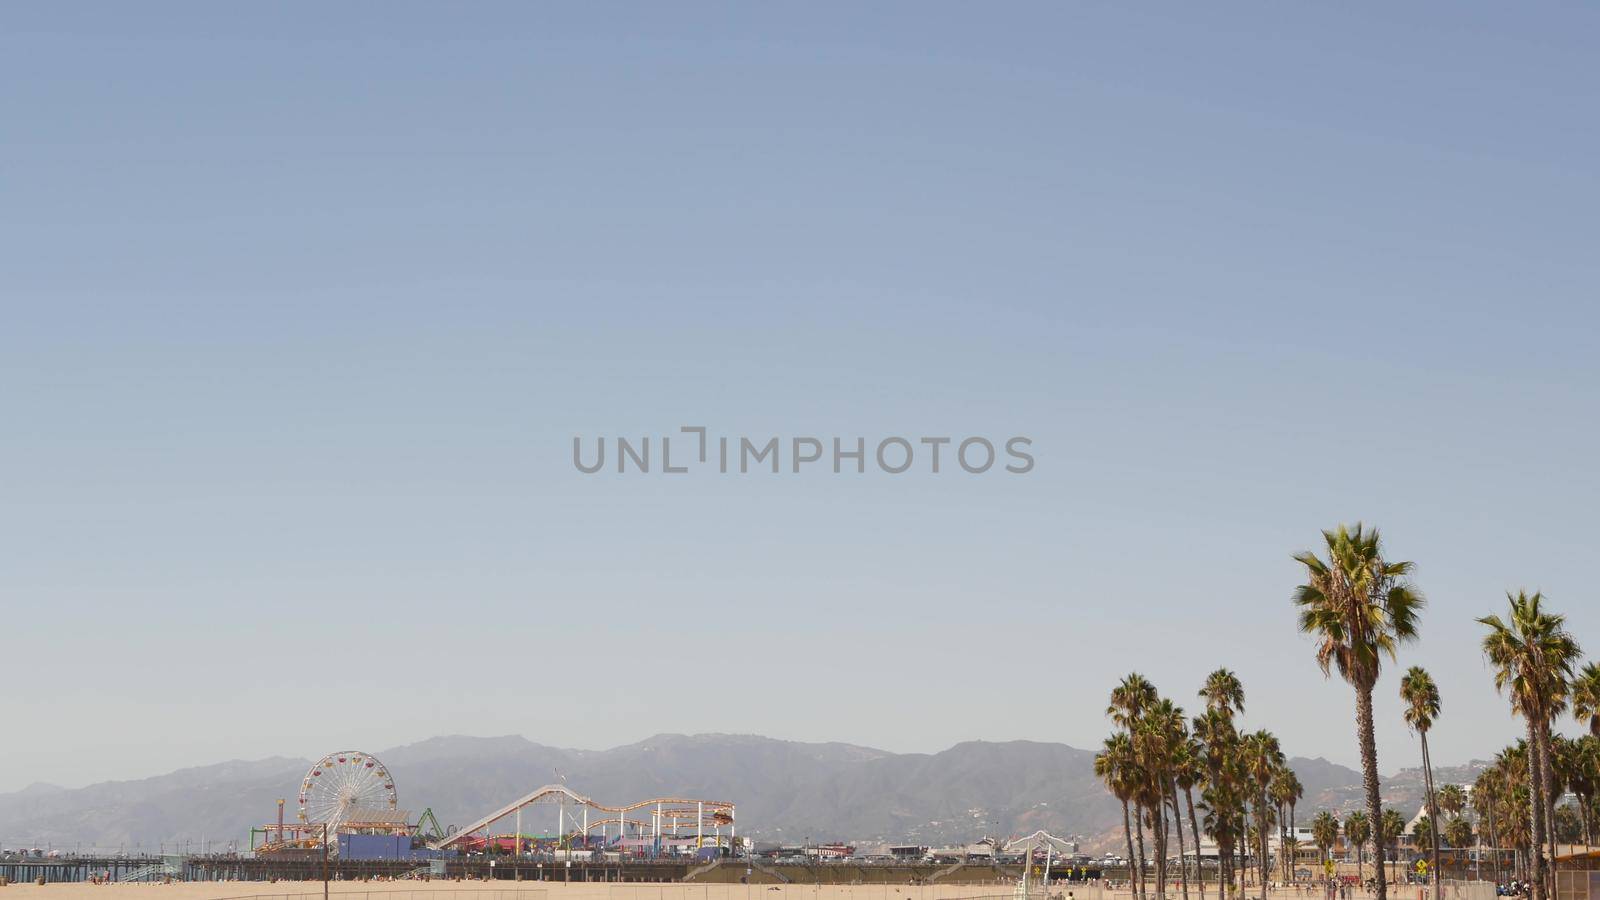 California beach aesthetic, classic ferris wheel, amusement park on pier, Santa Monica pacific ocean resort. Summertime iconic view, palm trees and sky, symbol of Los Angeles with copy space, CA USA.